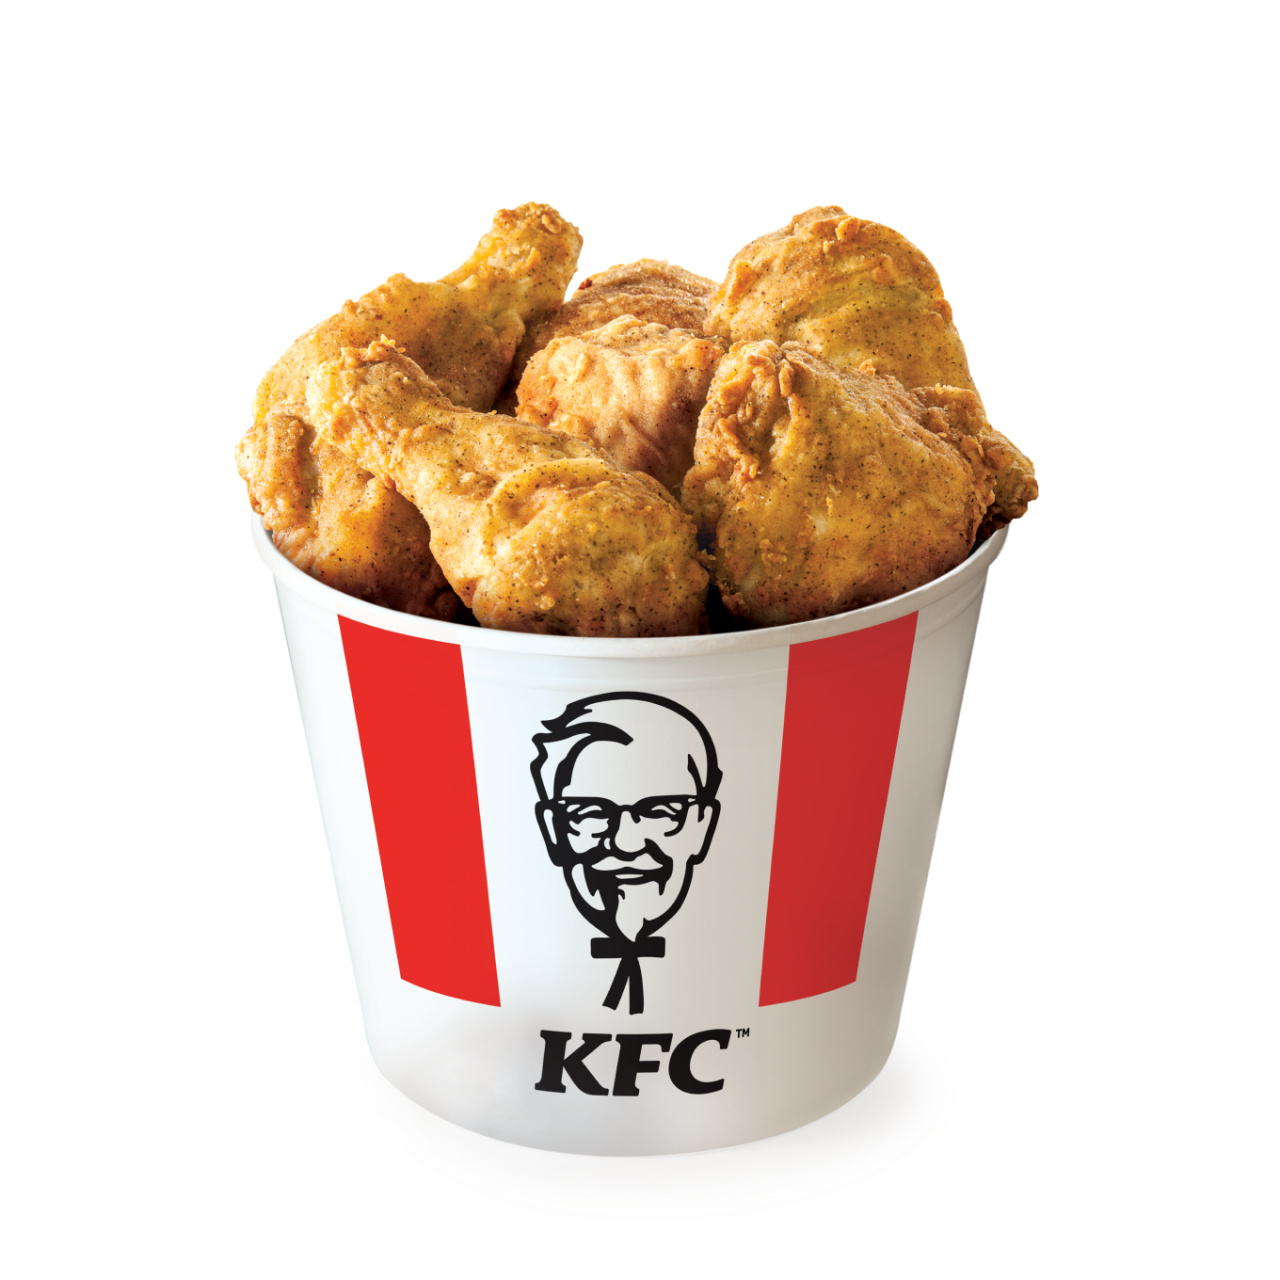 Kentucky Fried Chicken Bucket Background PNG Image